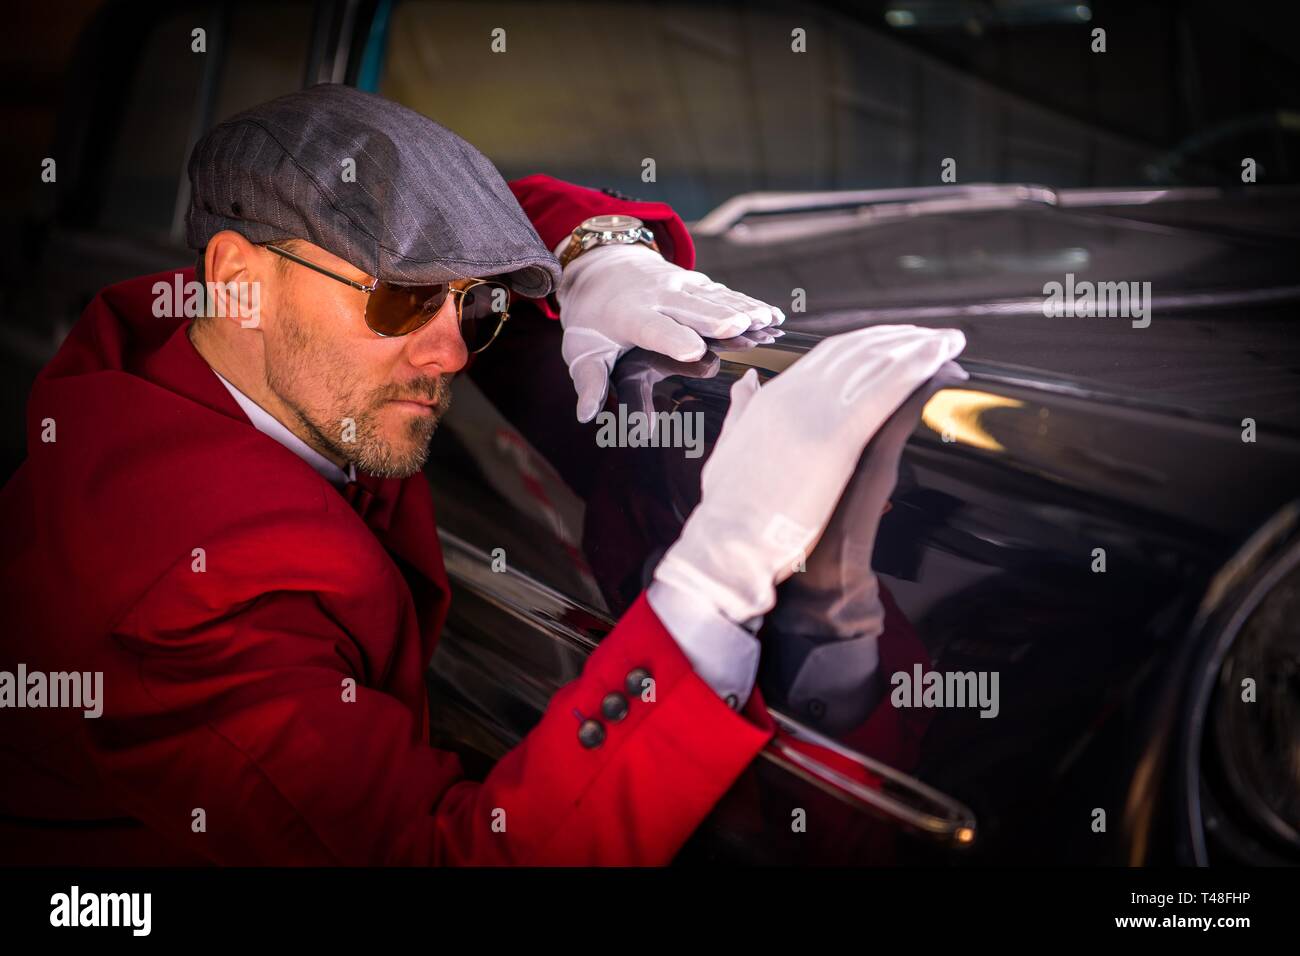 Vintage Classic Cars Collector. Caucasian Men Taking Close Look on the Vehicle Body. Automotive Theme. Stock Photo